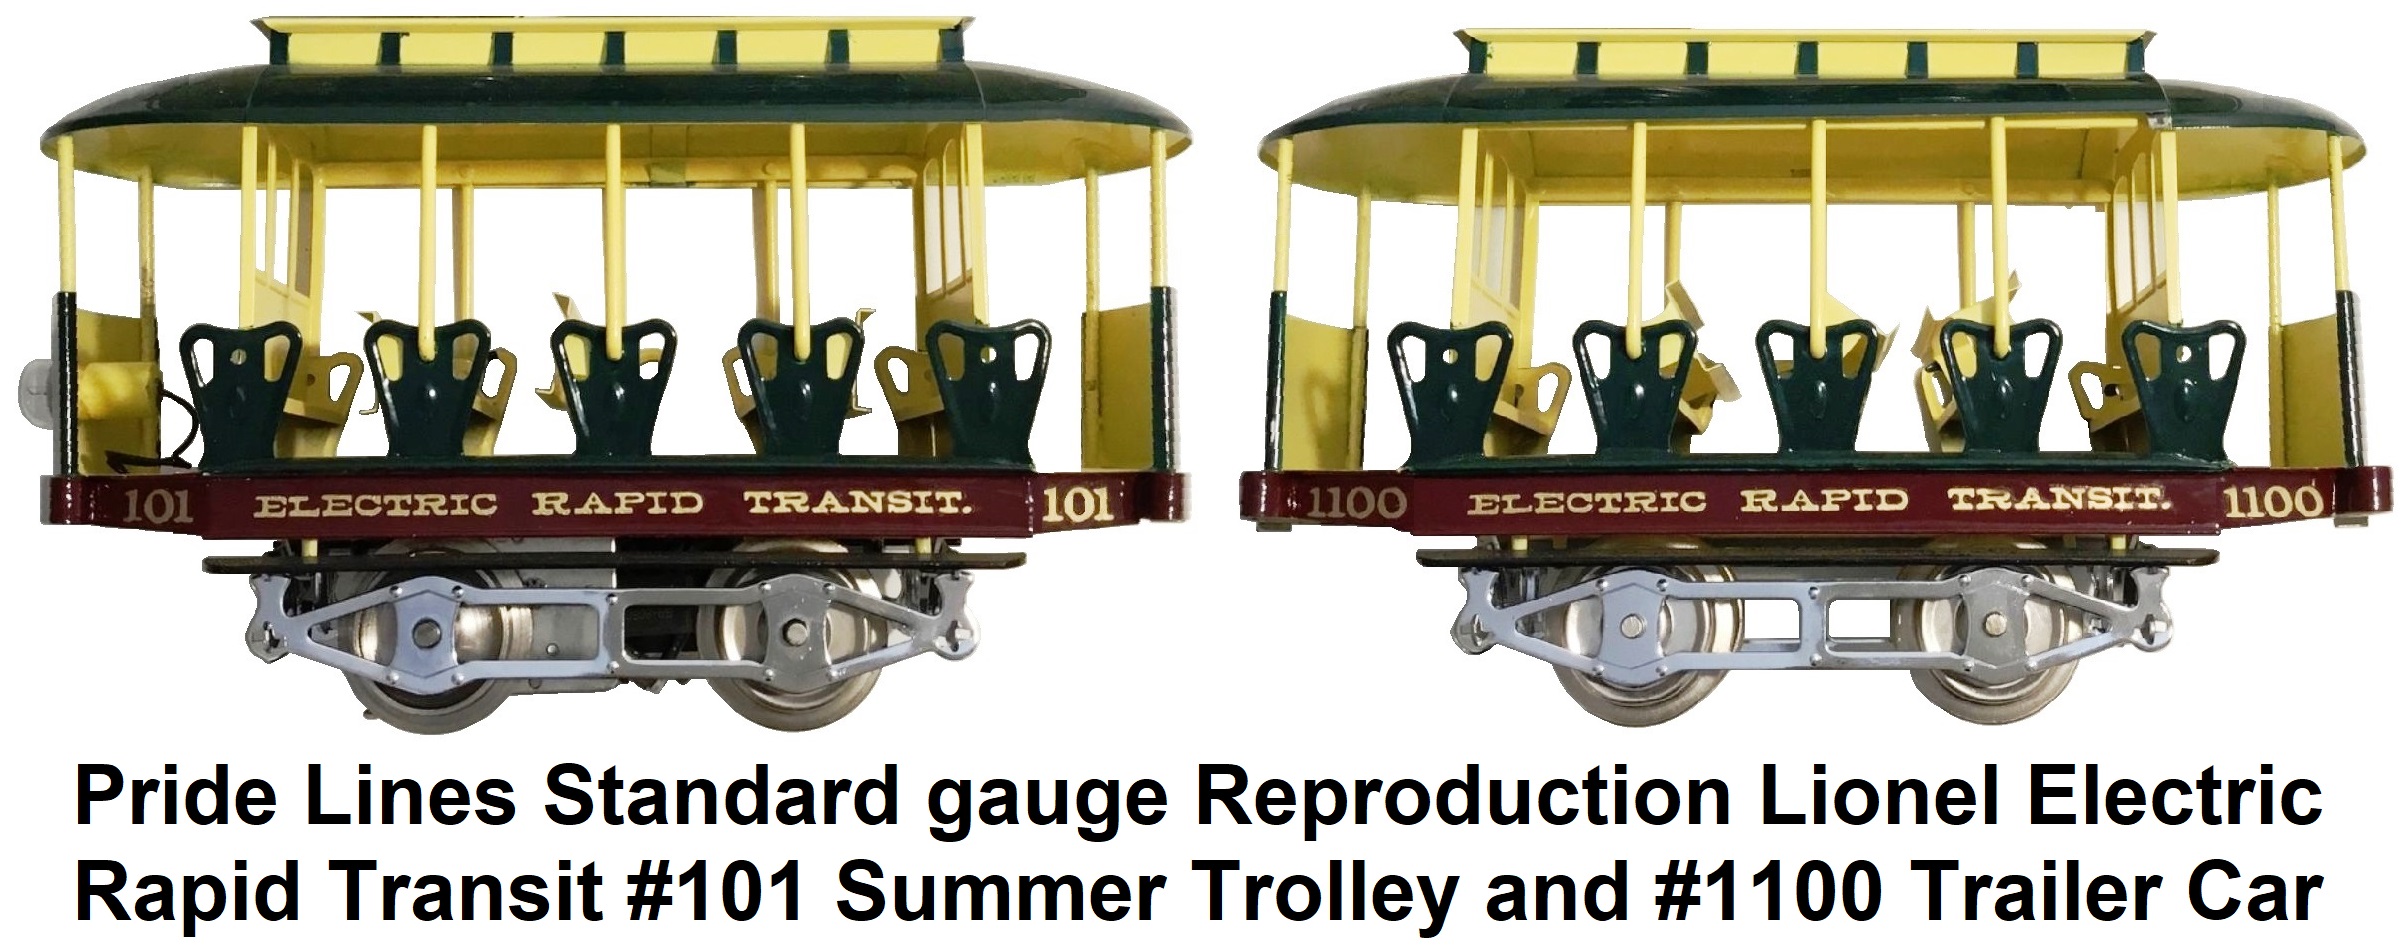 Pride Lines Standard gauge Reproduction Lionel Electric Rapid Transit #101 Summer Trolley and #1100 trailer car